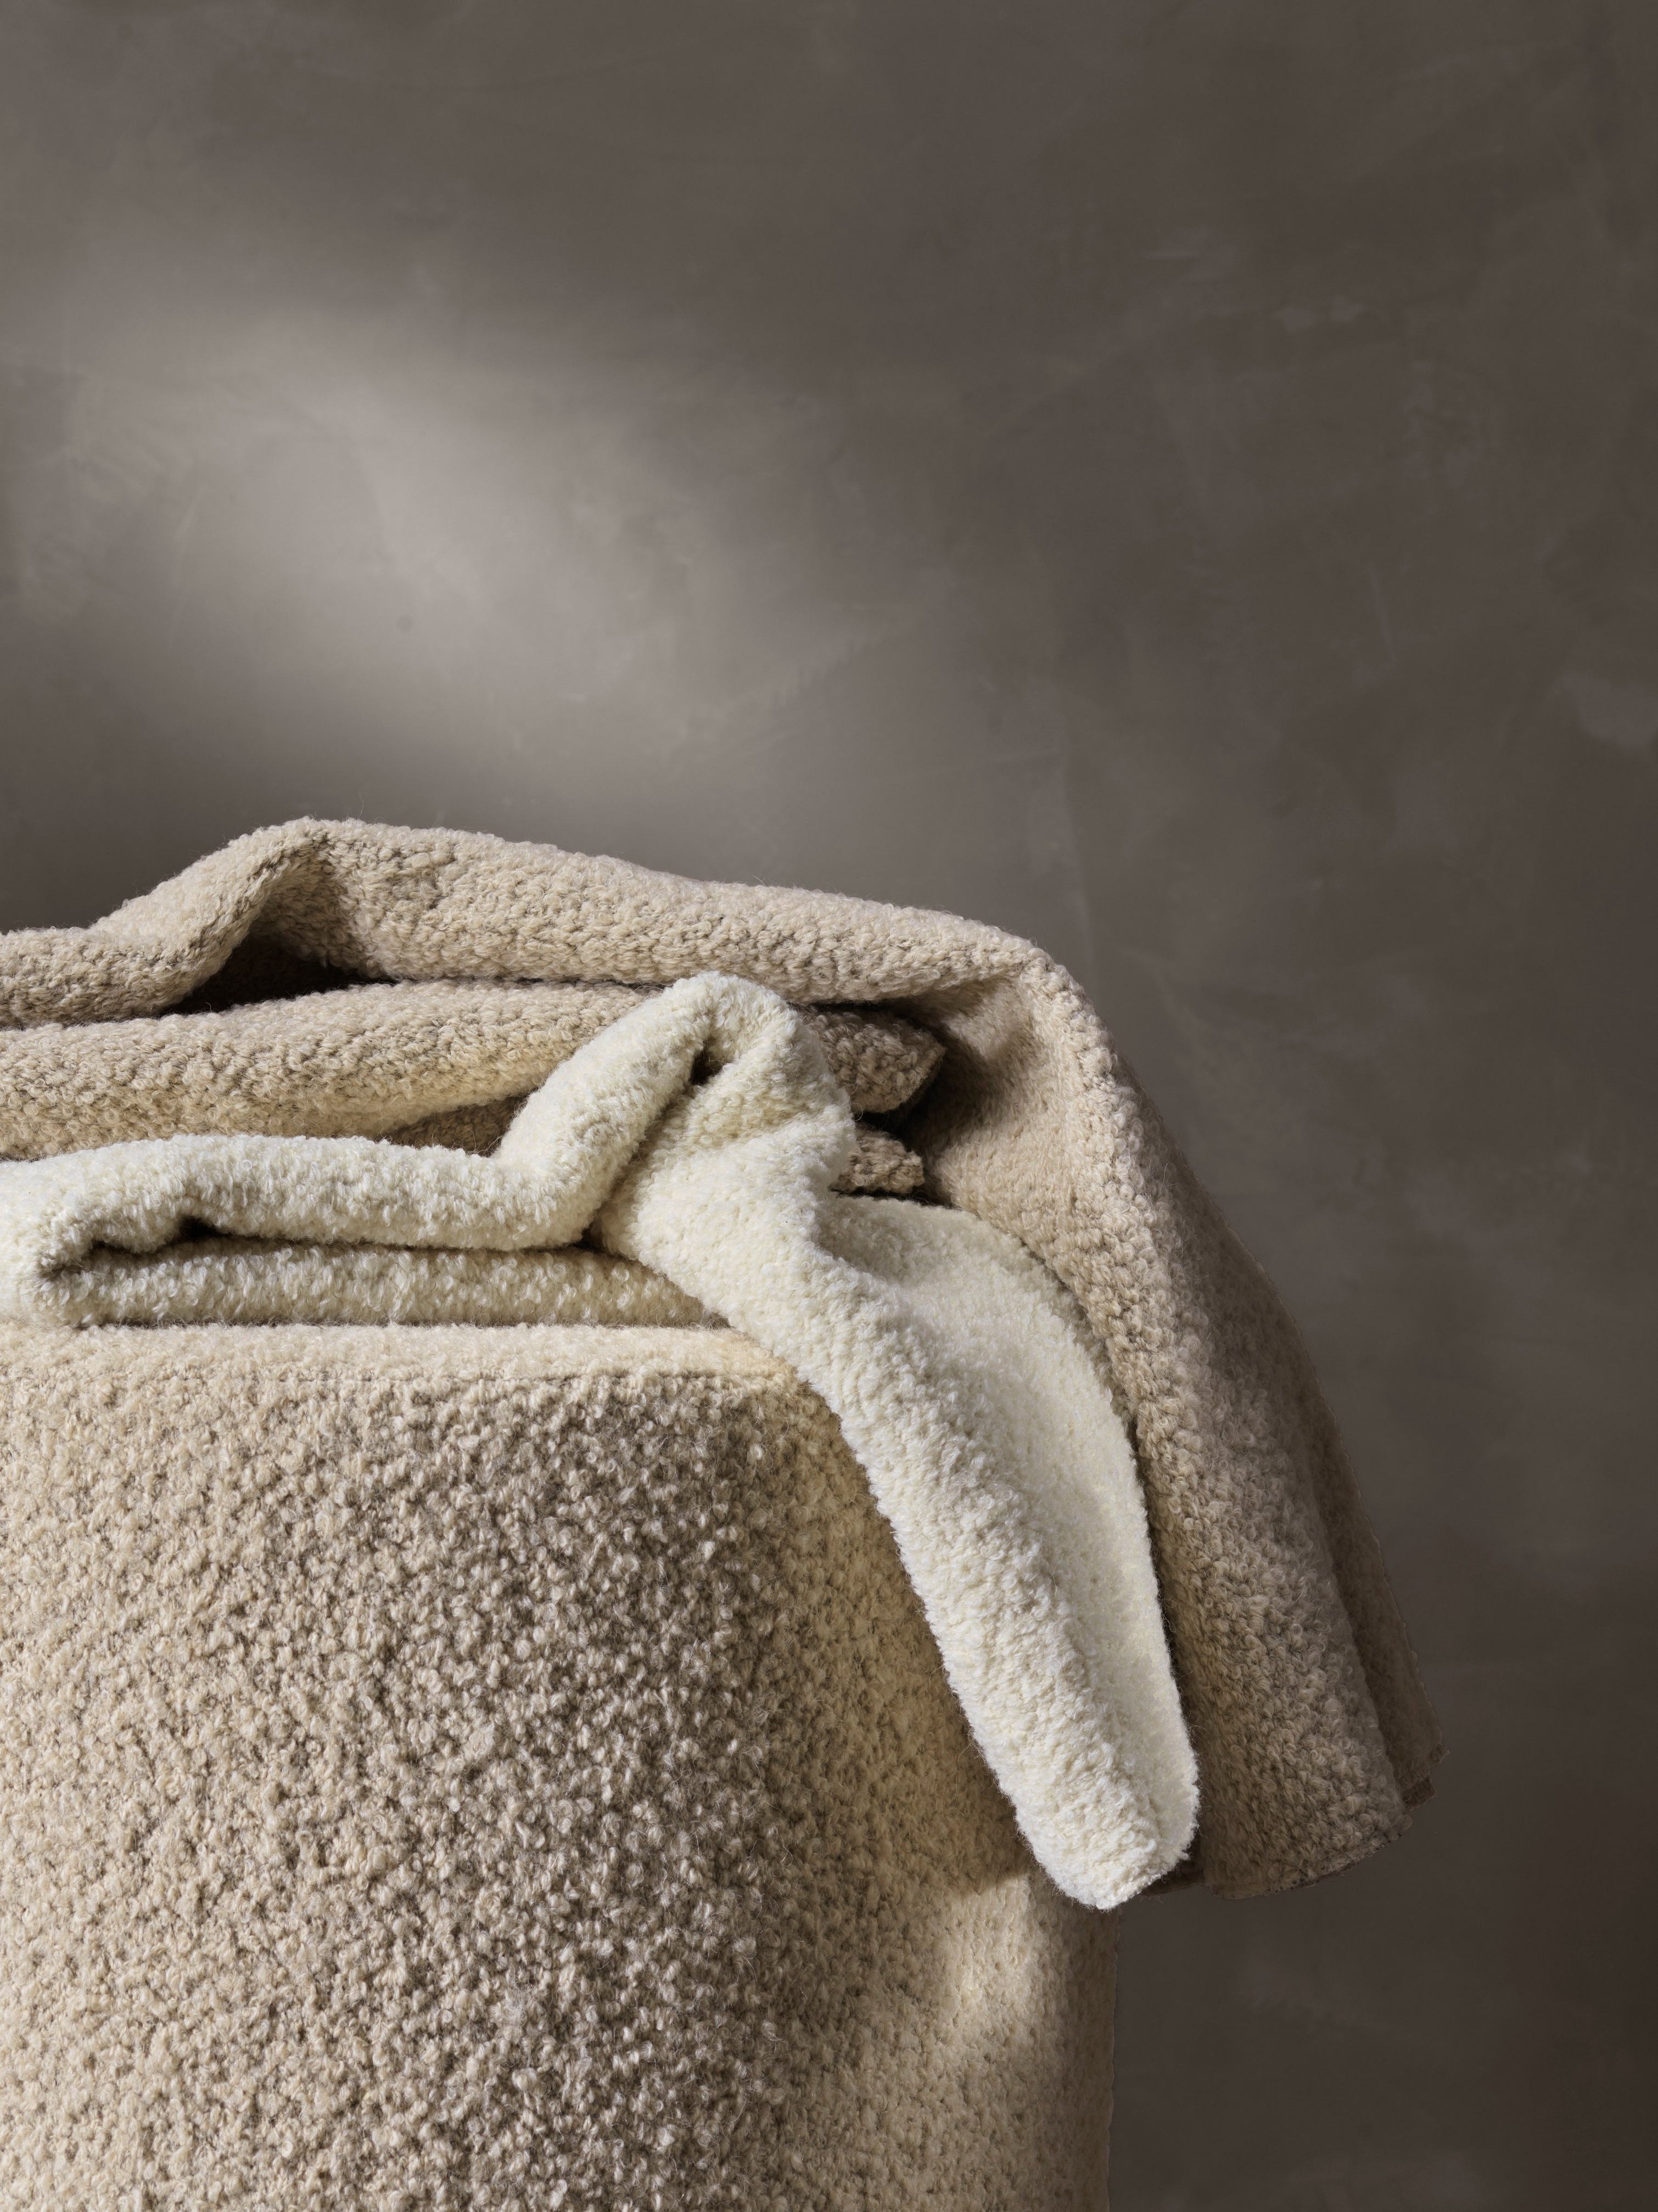 Textured bouclé fabric draped over an object with a soft, plush appearance.